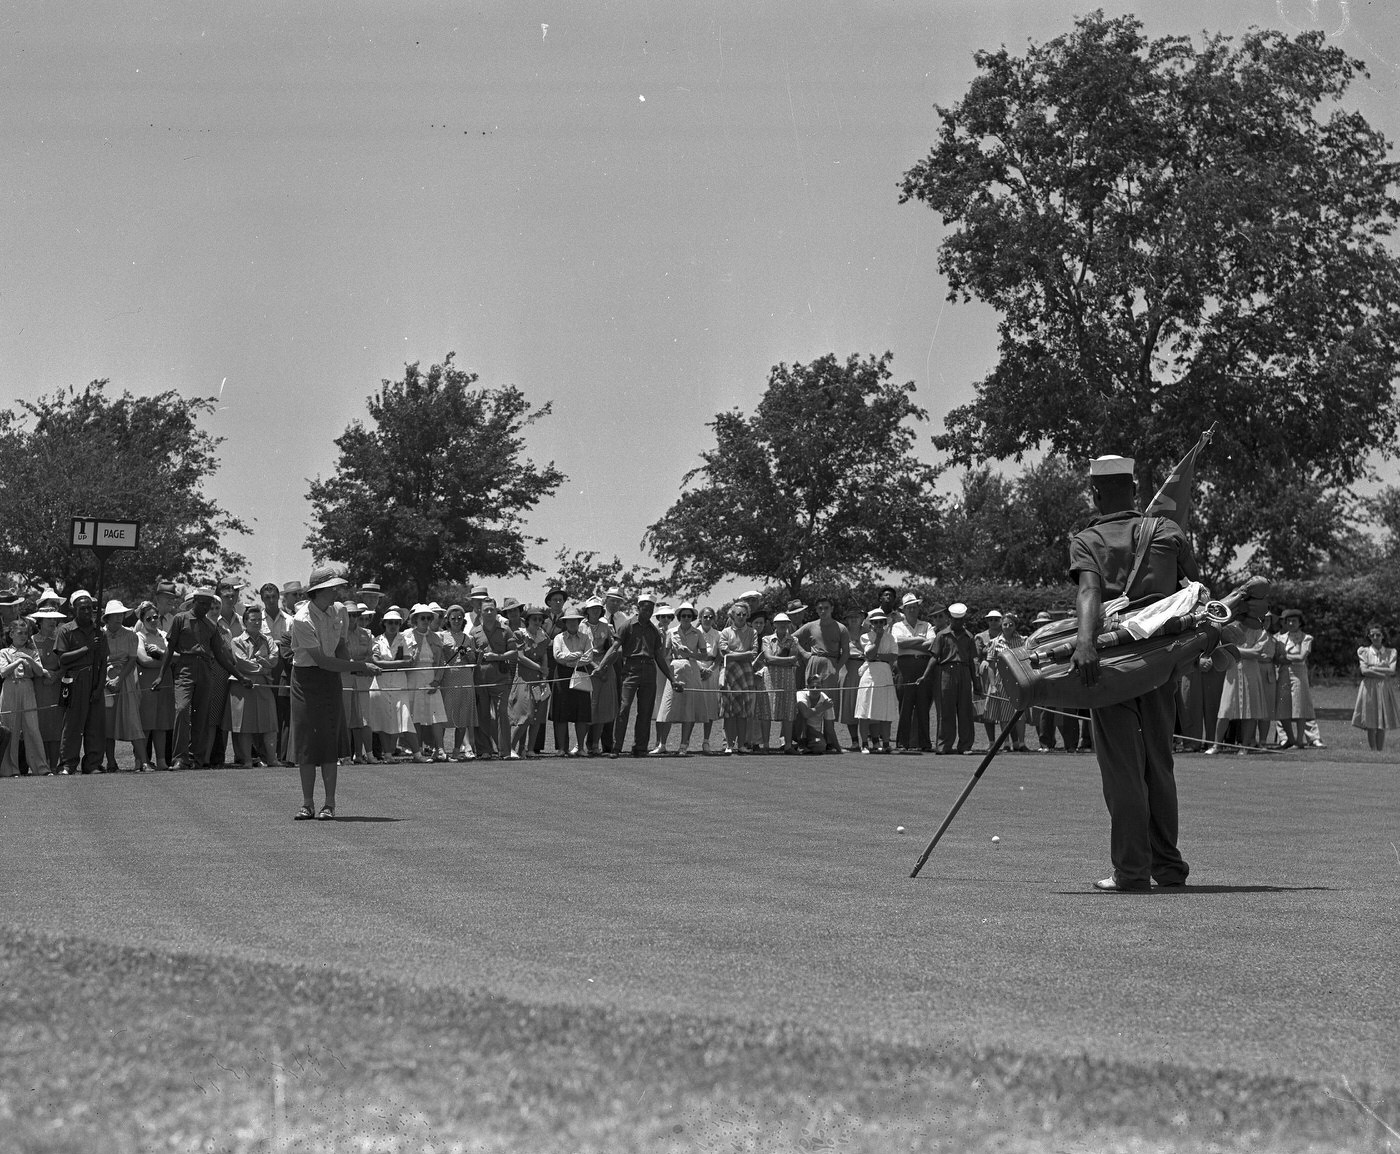 Mrs. Frank Goldthwaite making a long putt, River Crest Country Club, 1940